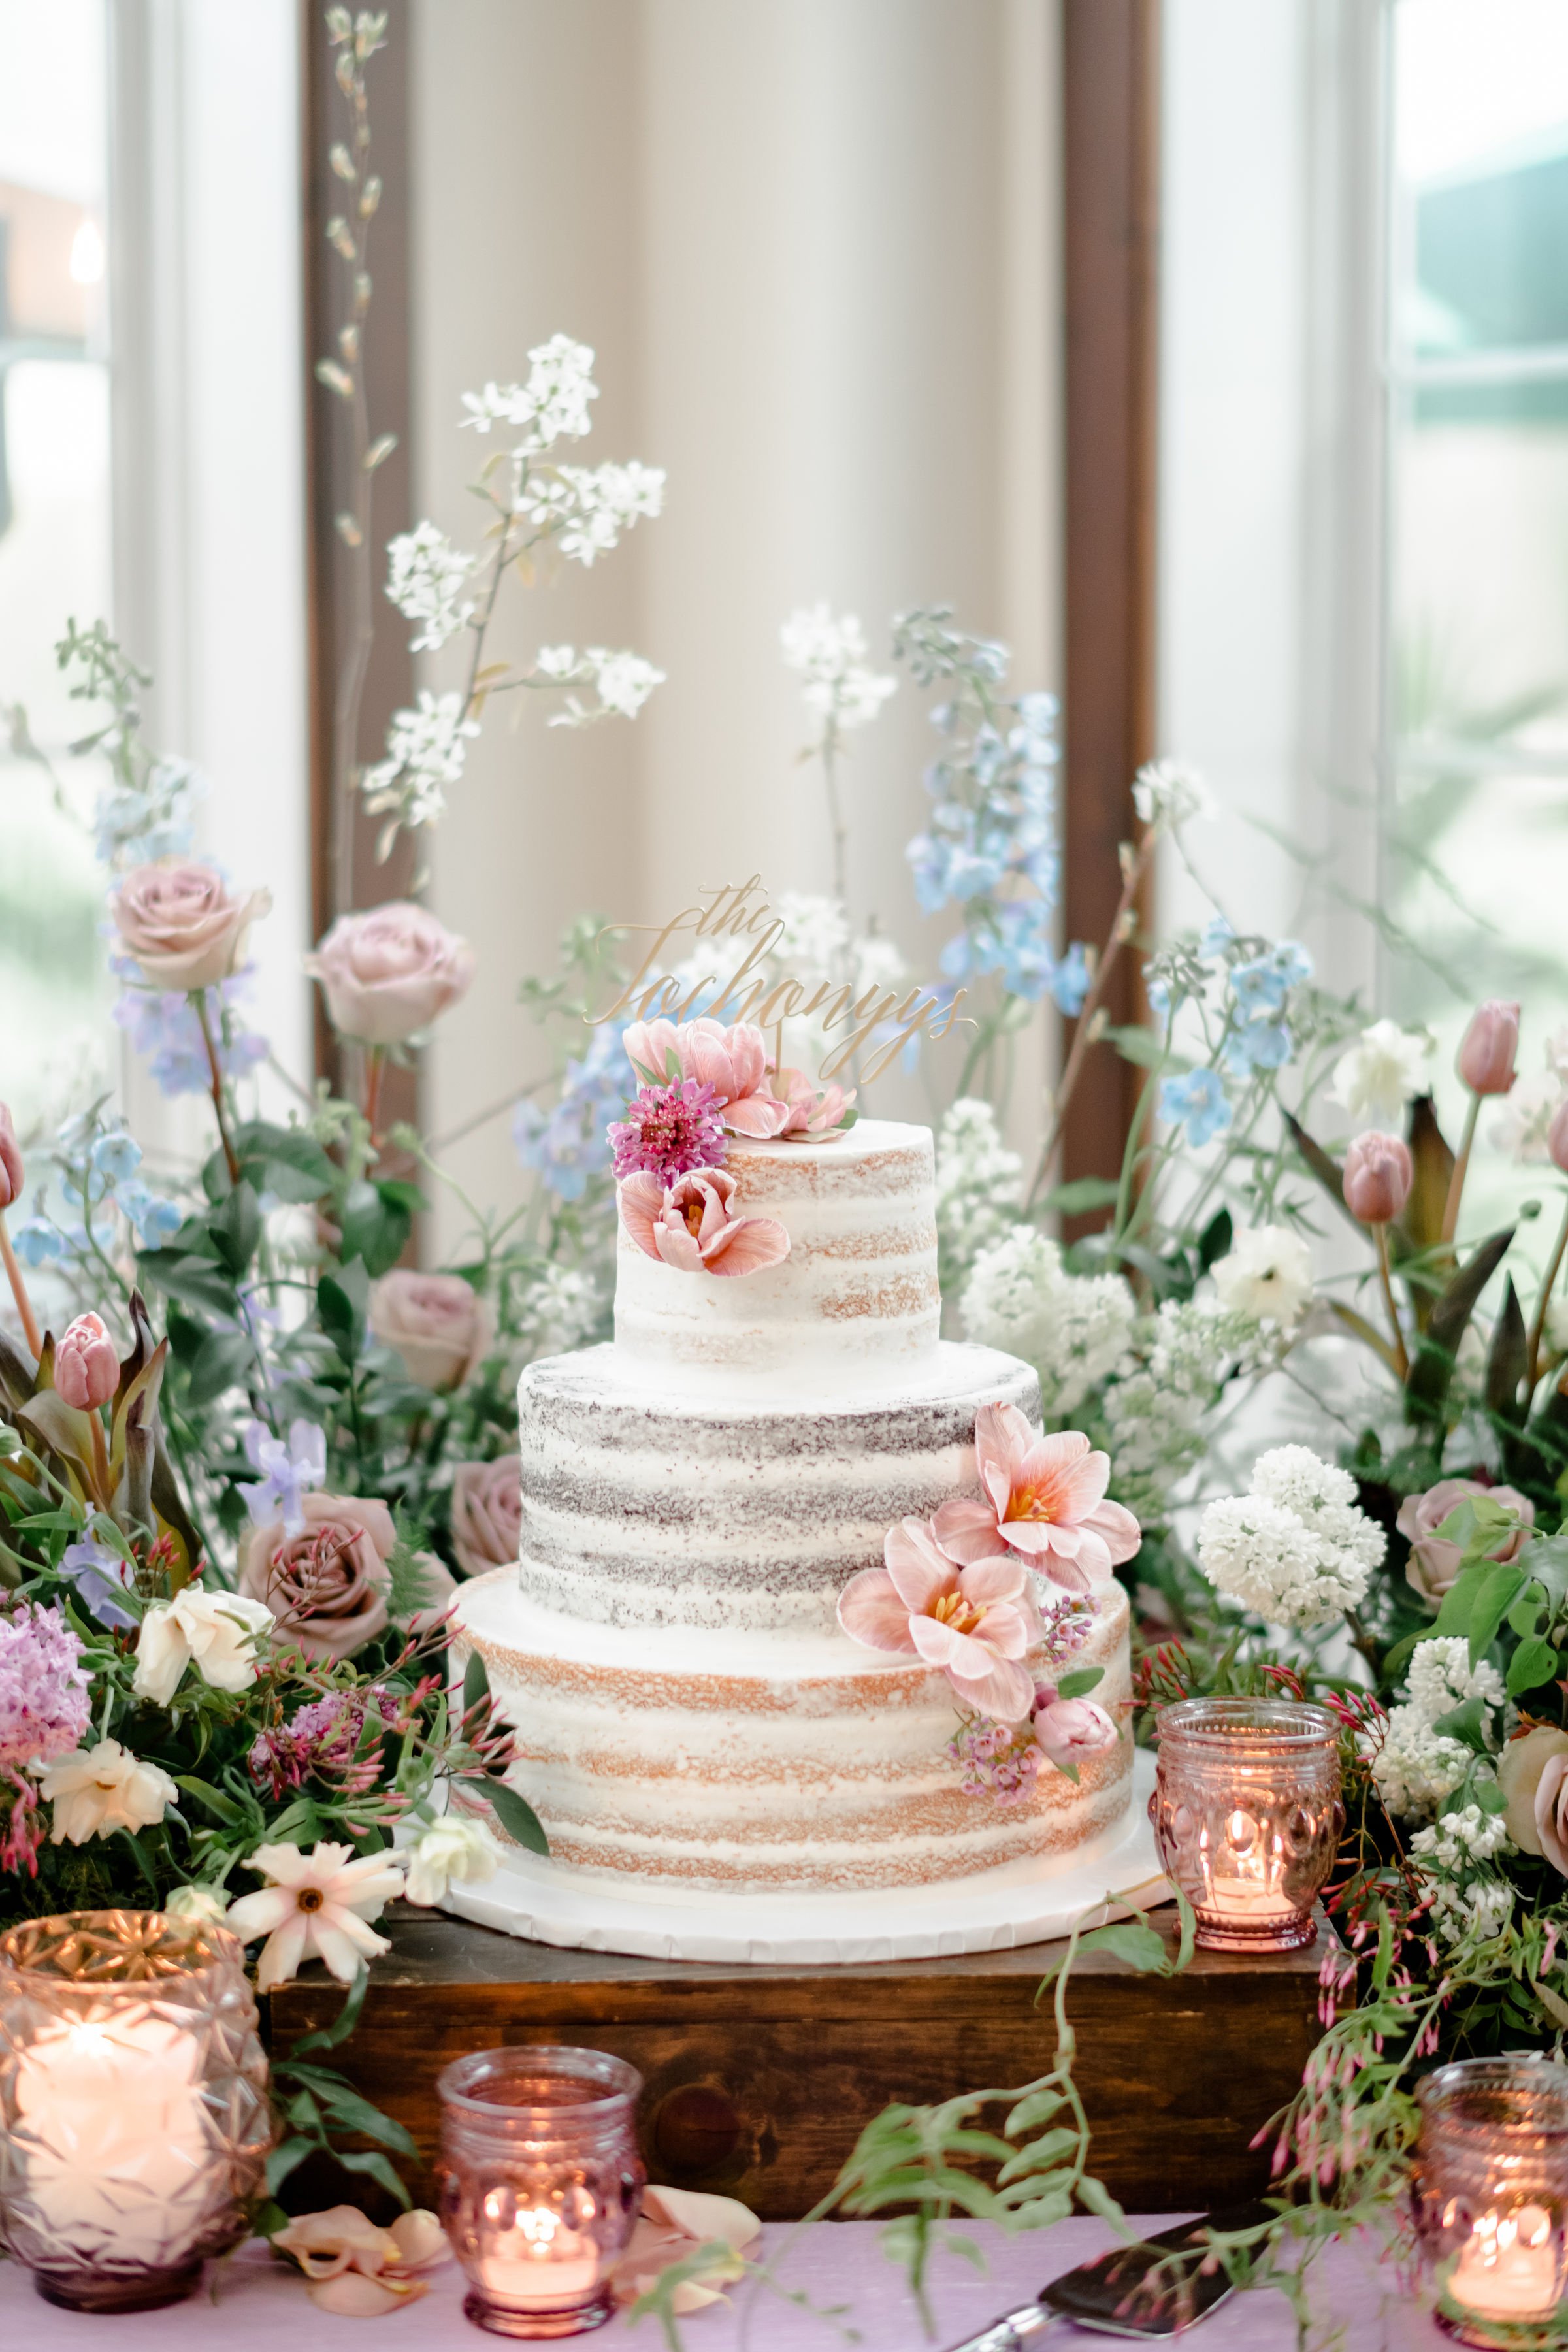 Cake Table Displays — A Garden Party